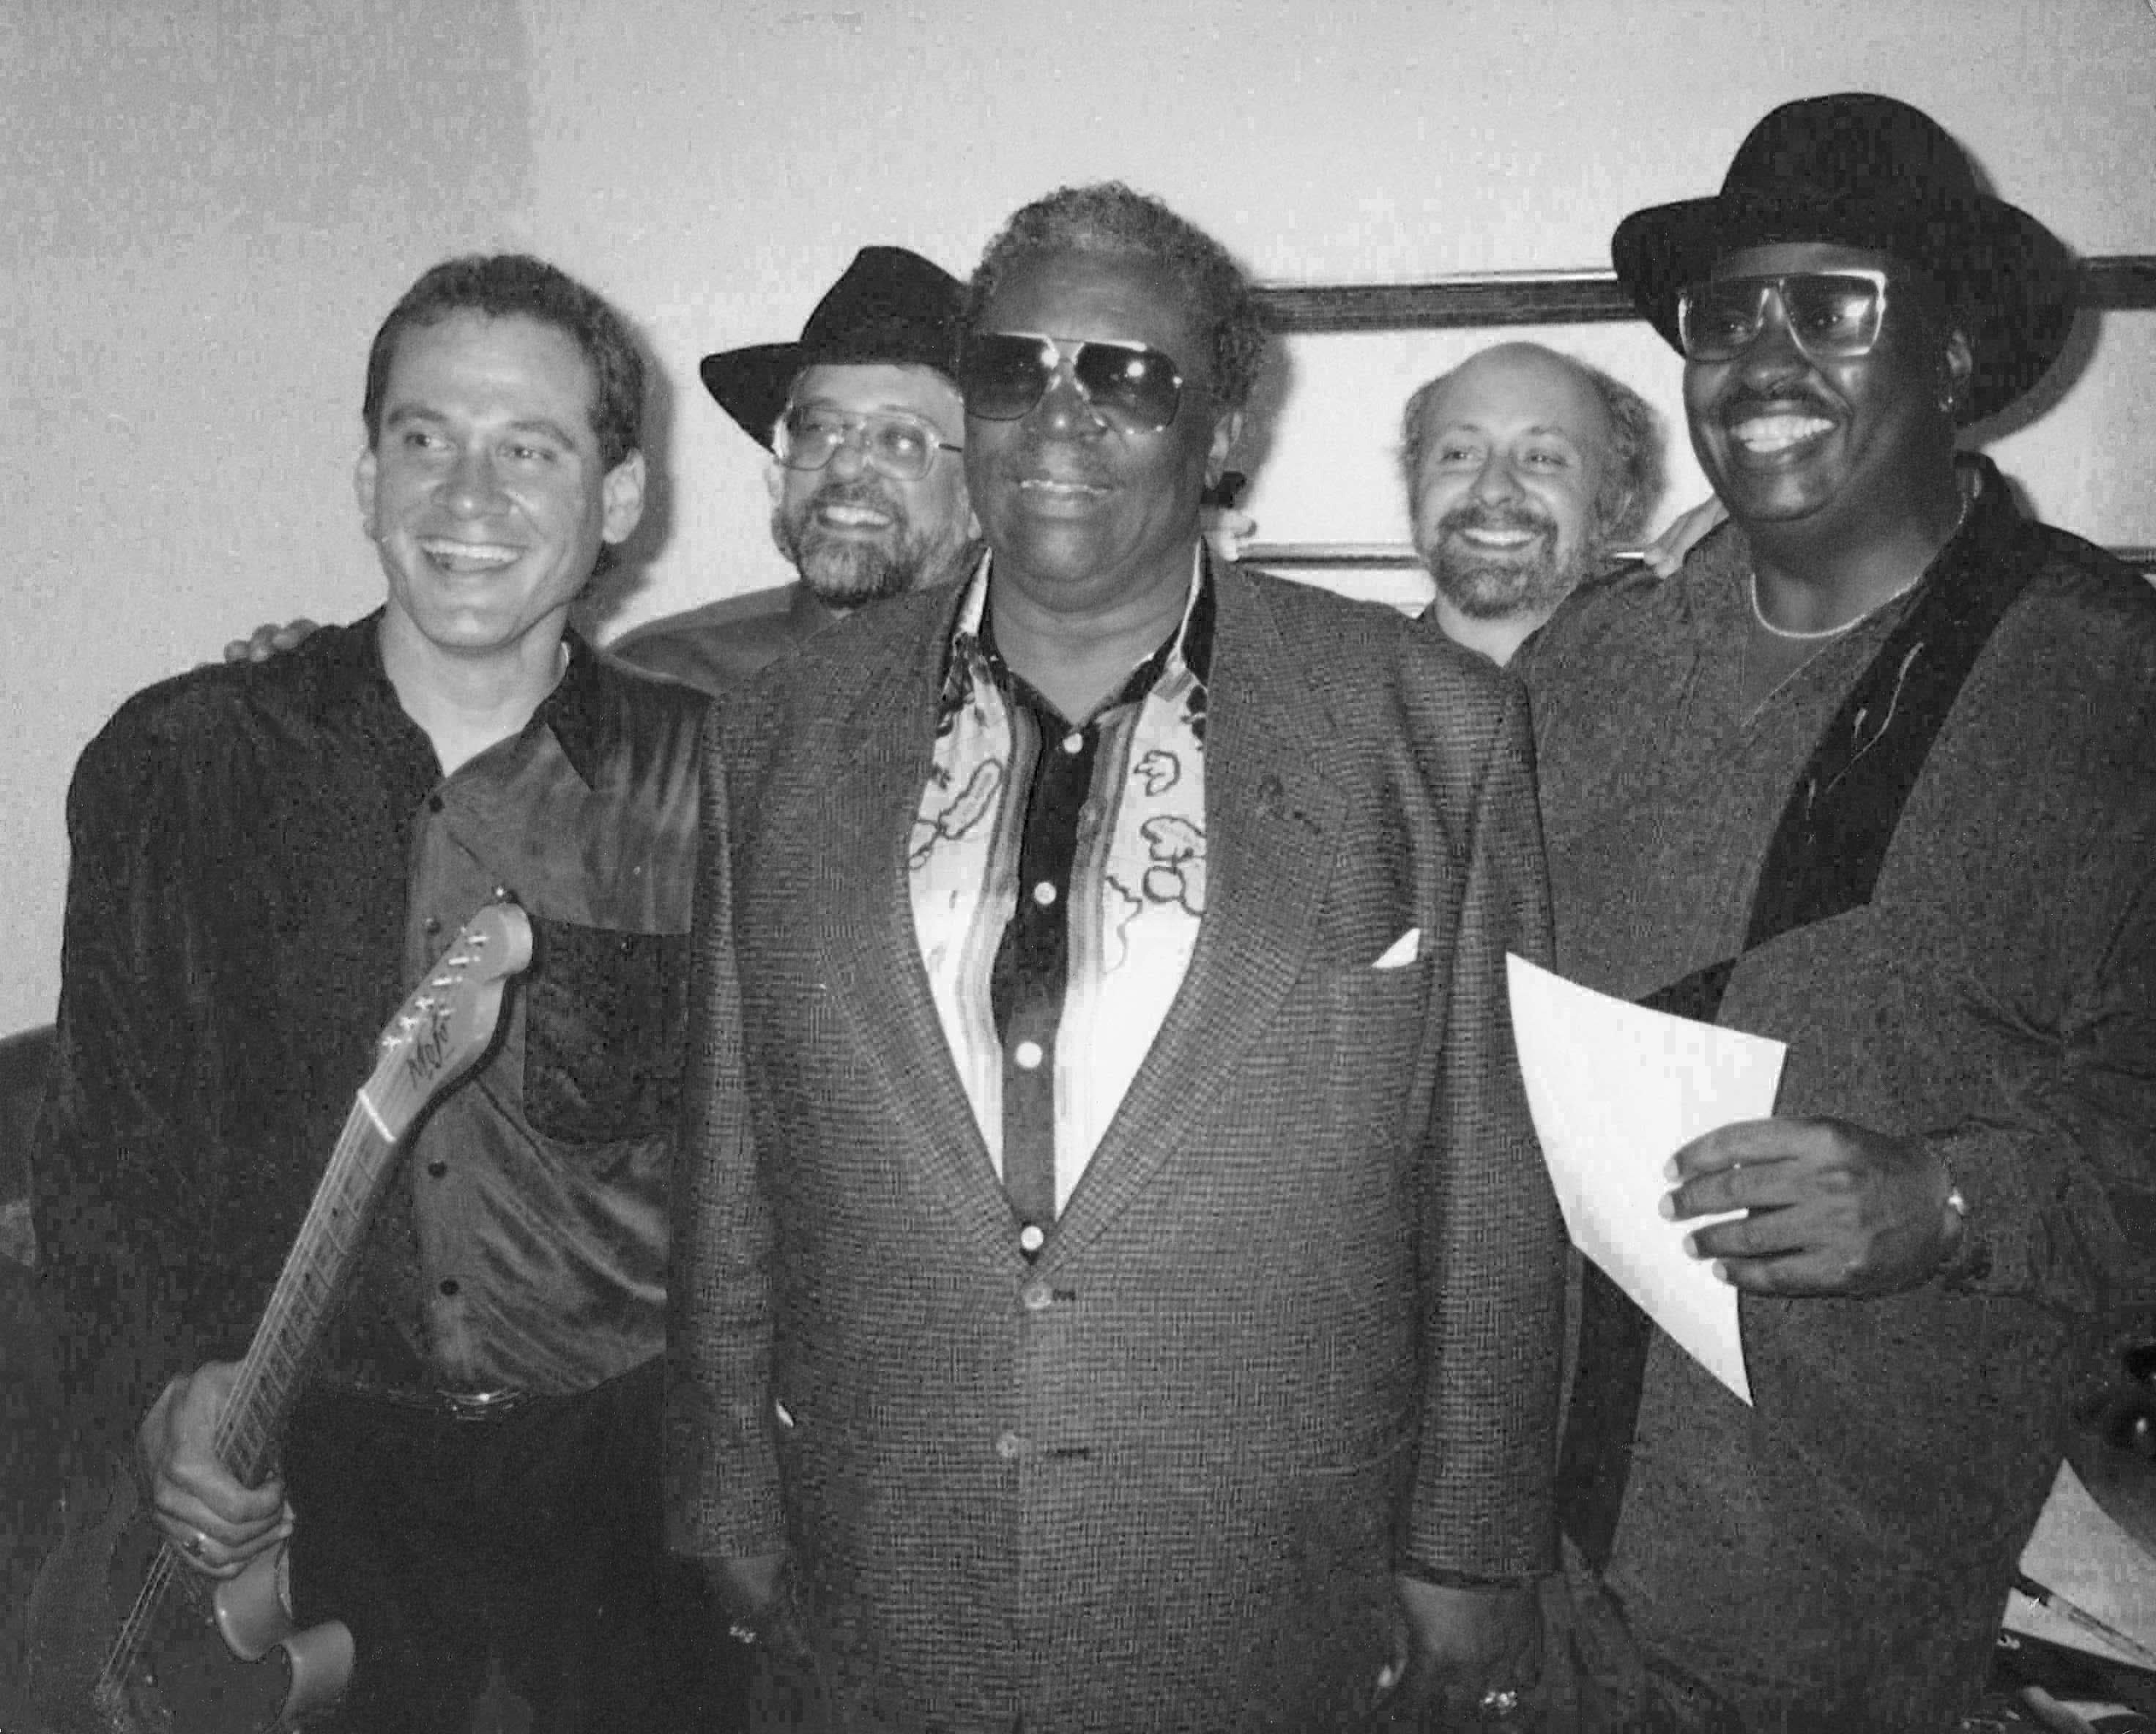 Jerry B. Bowden posting with the late, great B.B. King